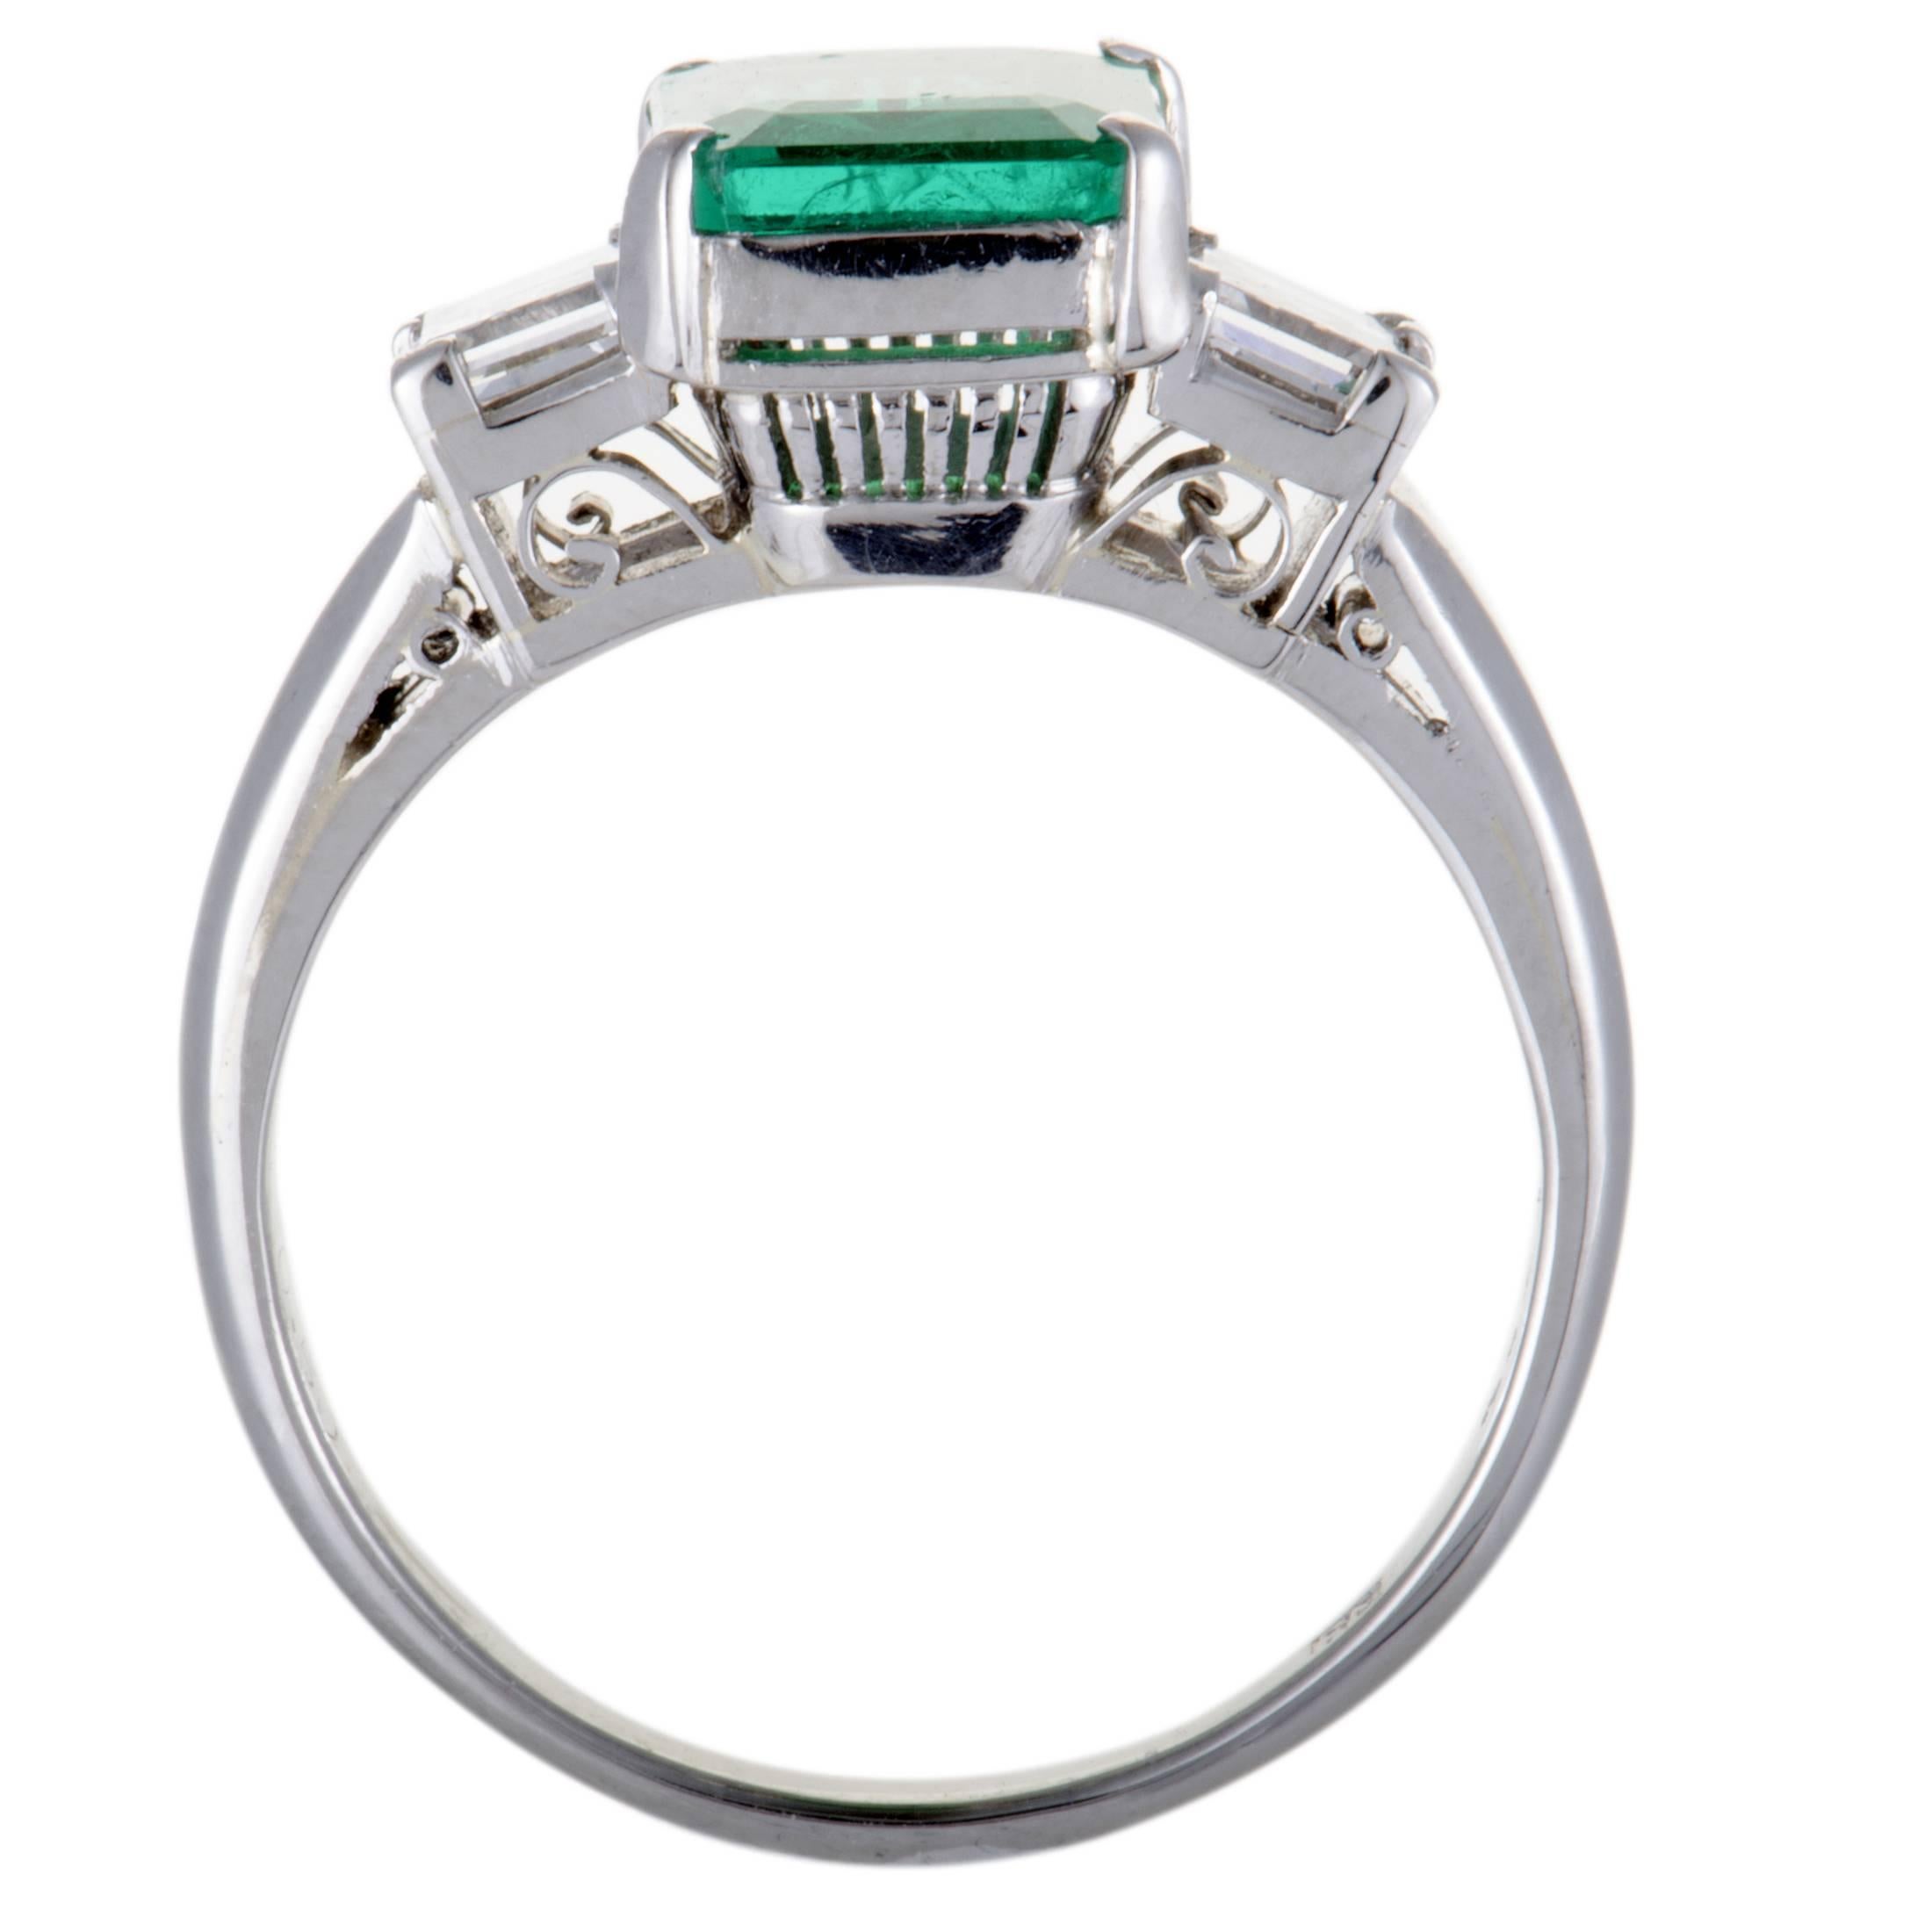 This mesmerizing ring features a classic design and compels with its luxurious décor. The fabulous ring is made of classy platinum and set with 0.50ct of sparkling diamonds around a captivating green emerald, weighing 1.40ct.
Ring Top Dimensions: